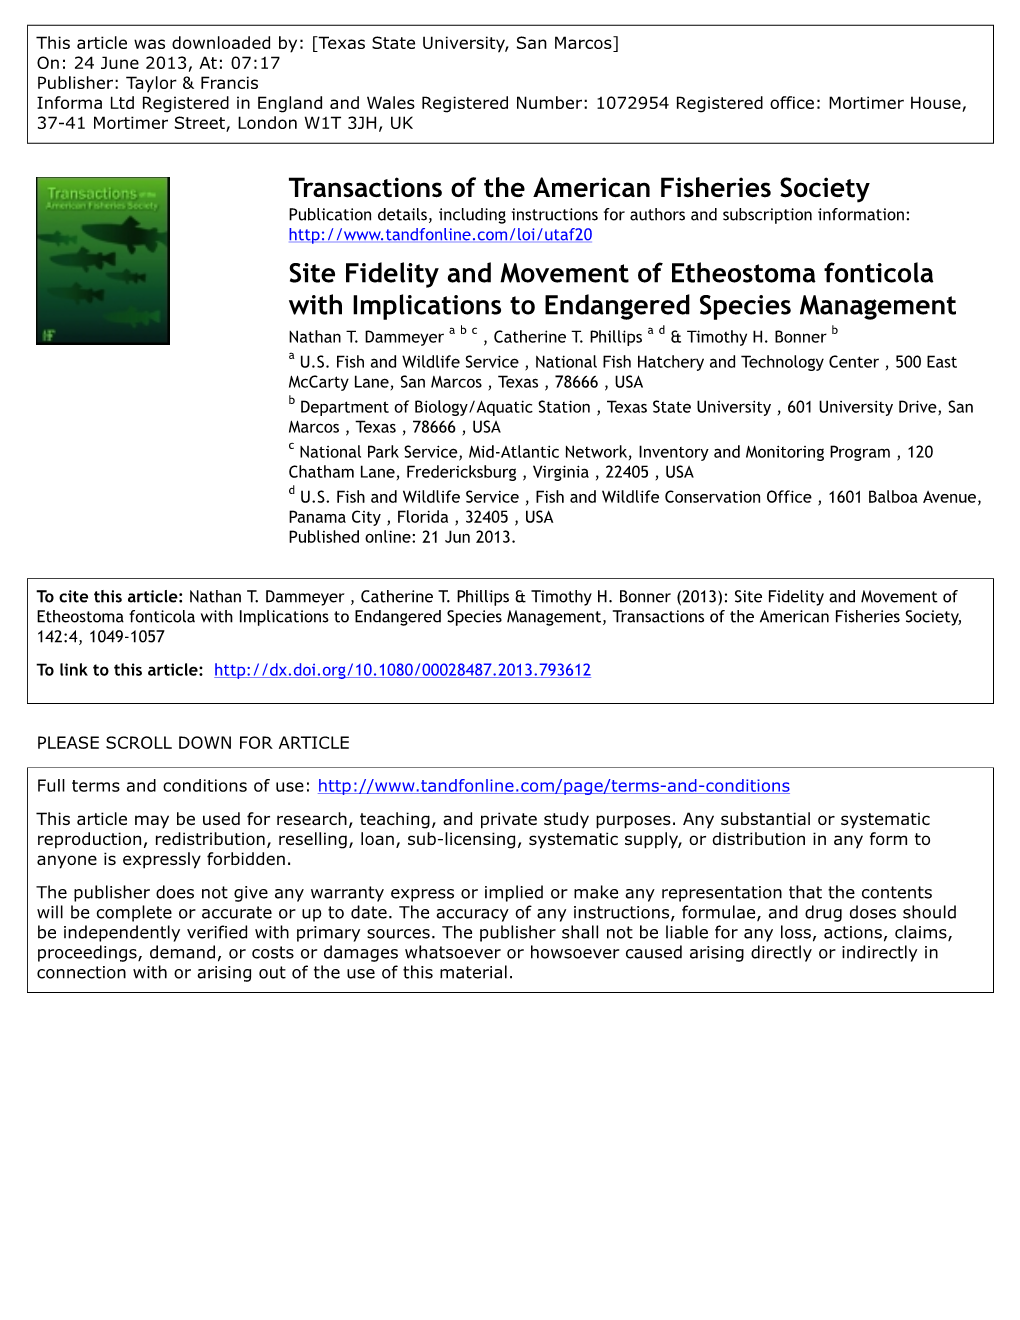 Site Fidelity and Movement of Etheostoma Fonticola with Implications to Endangered Species Management Nathan T